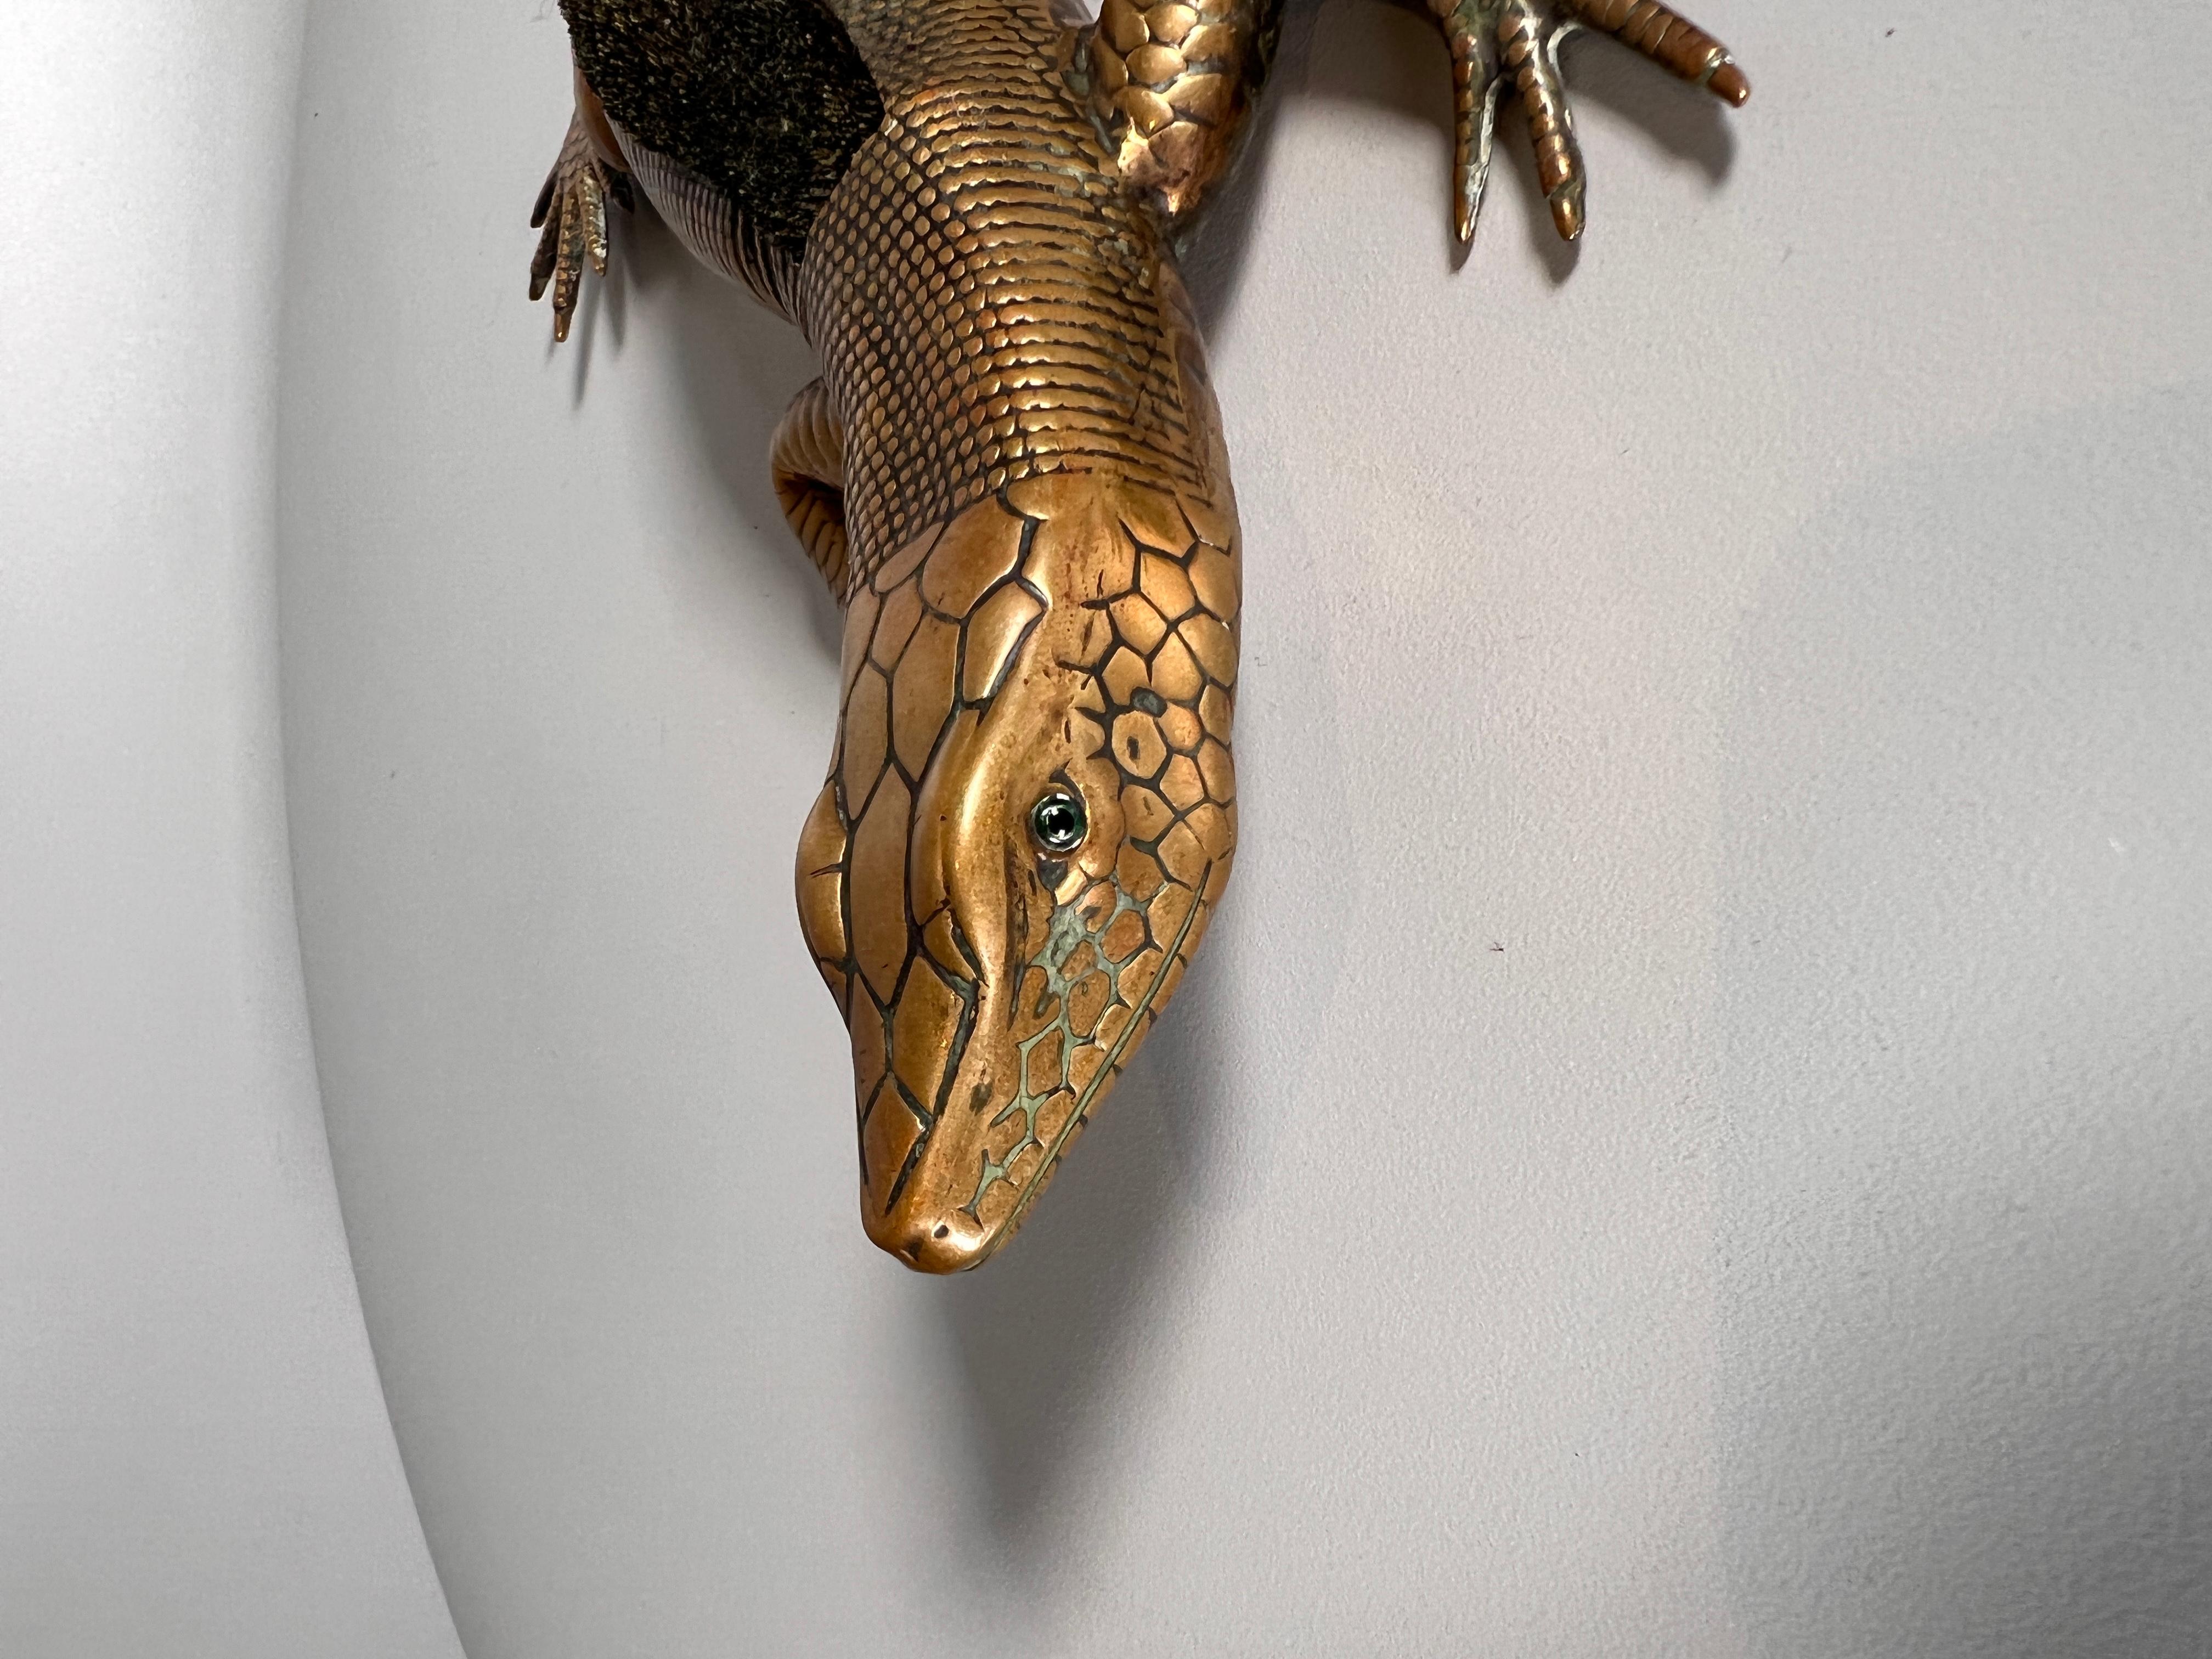 A fantastic and very large pen wipe in the form of a lizard, beautifully cast in bronze the lizard has inset glass eyes.